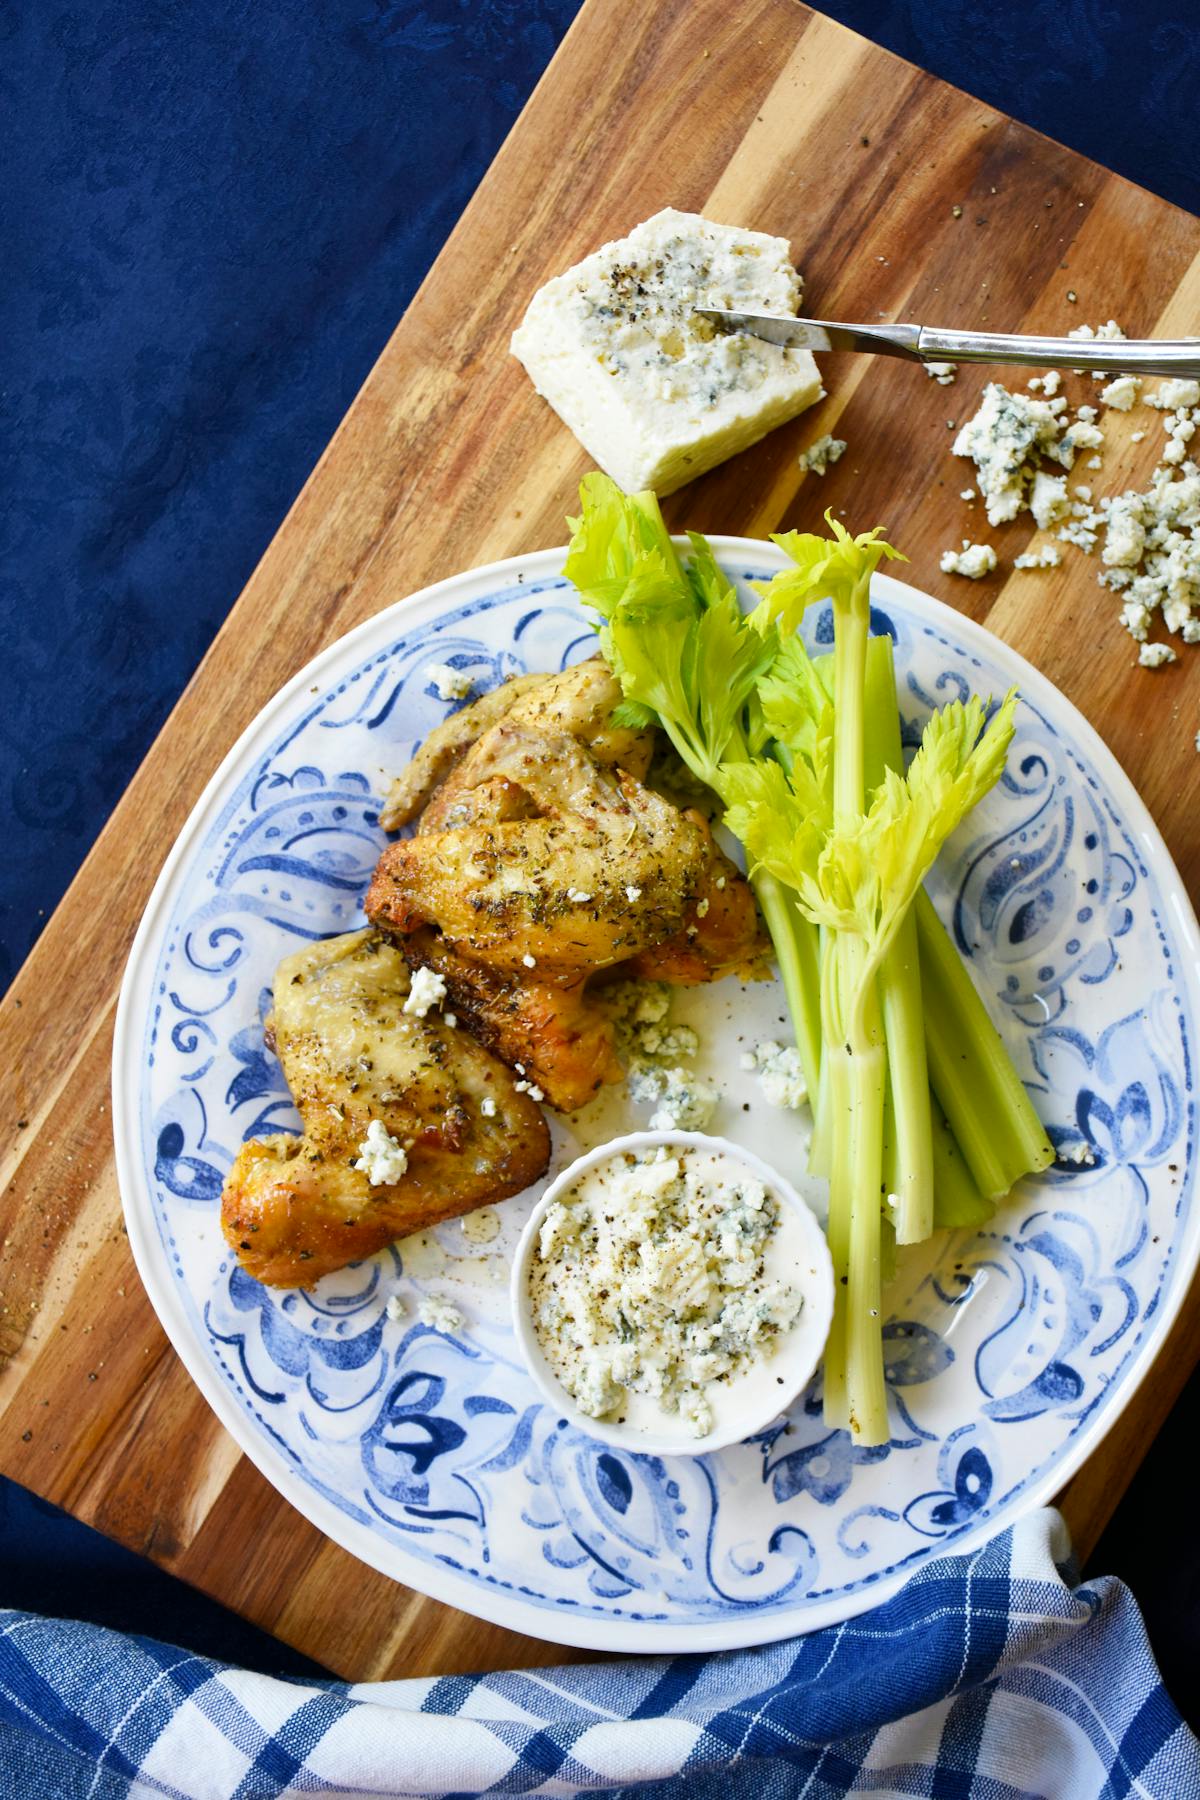 Chicken wings with blue cheese dressing